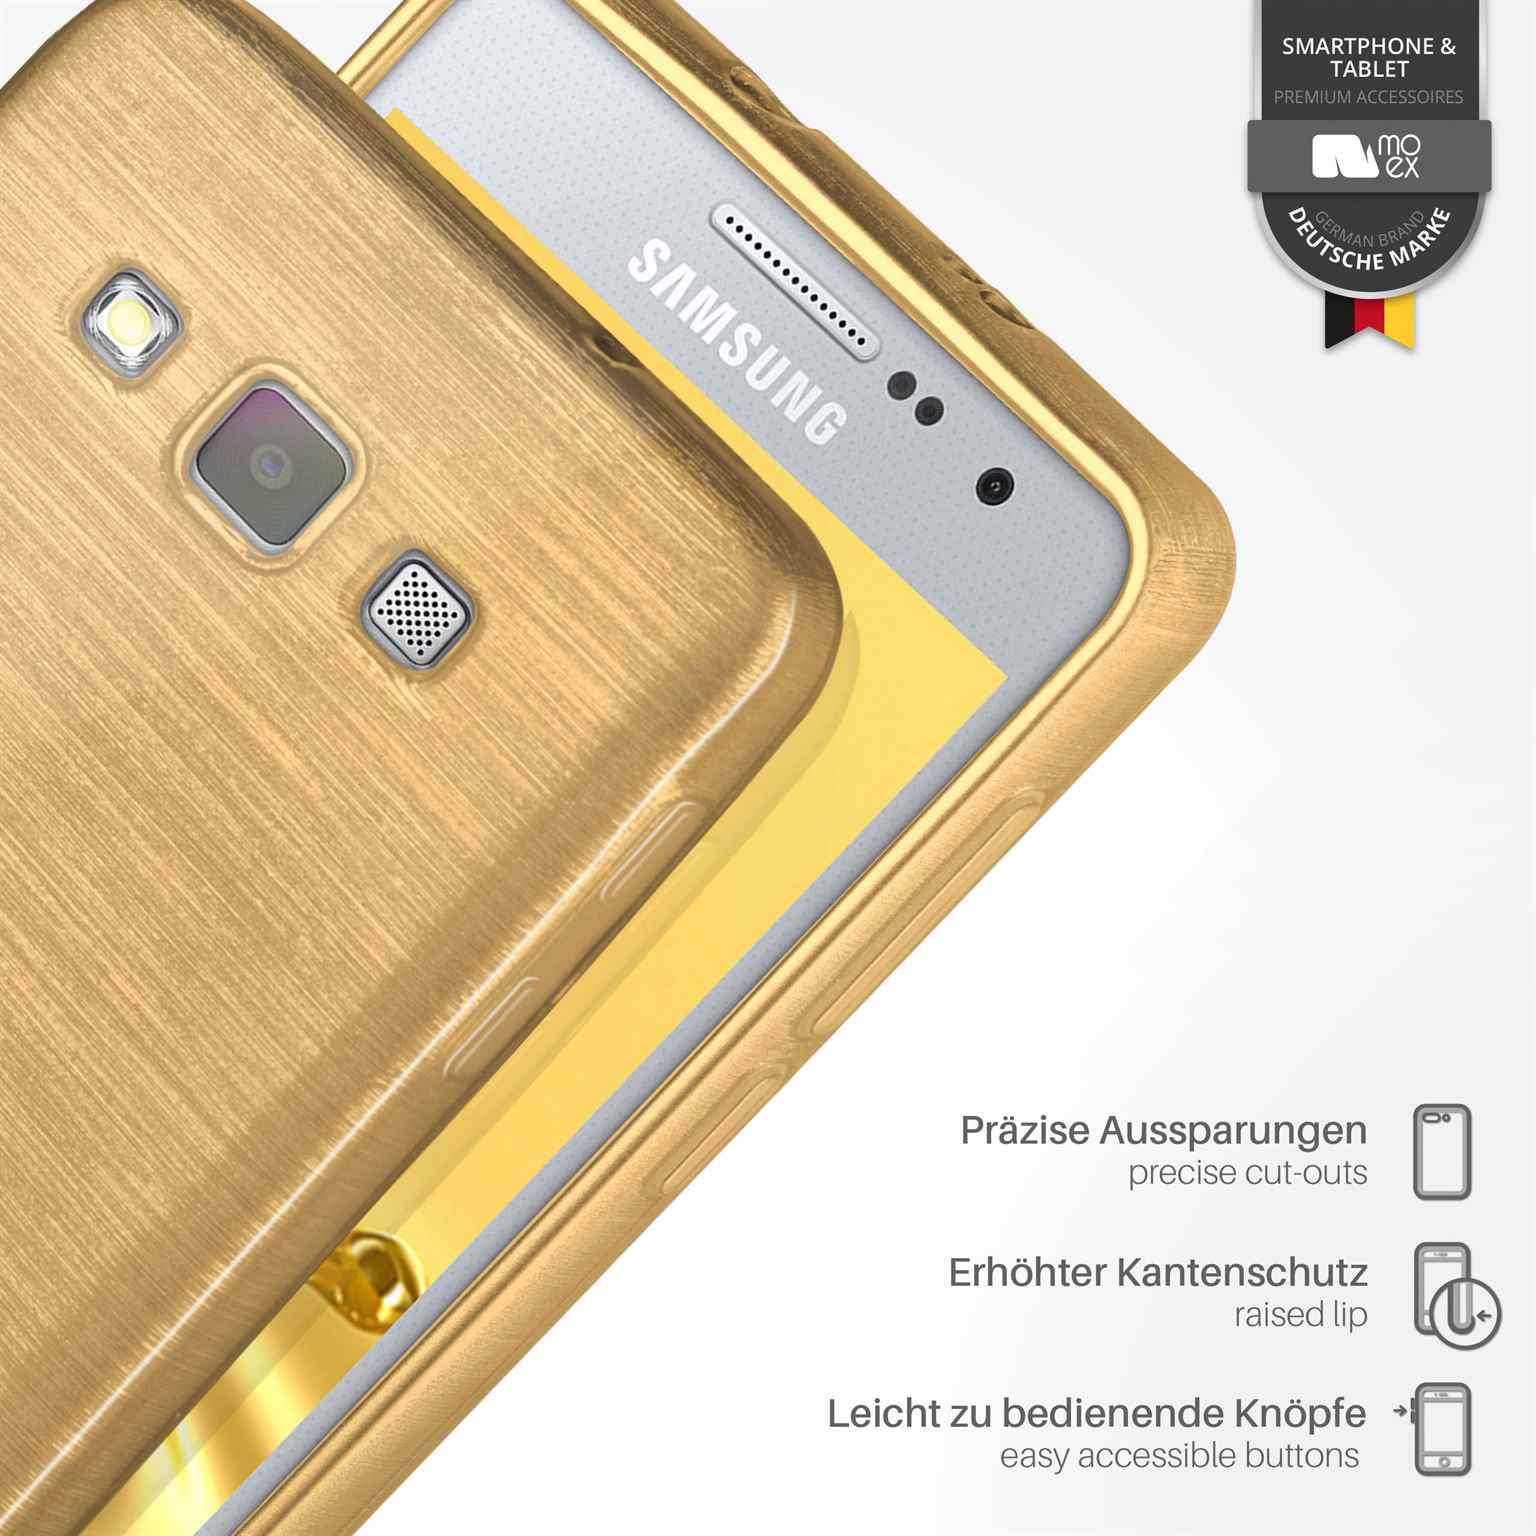 Backcover, A7 (2015), Samsung, Brushed MOEX Ivory-Gold Case, Galaxy